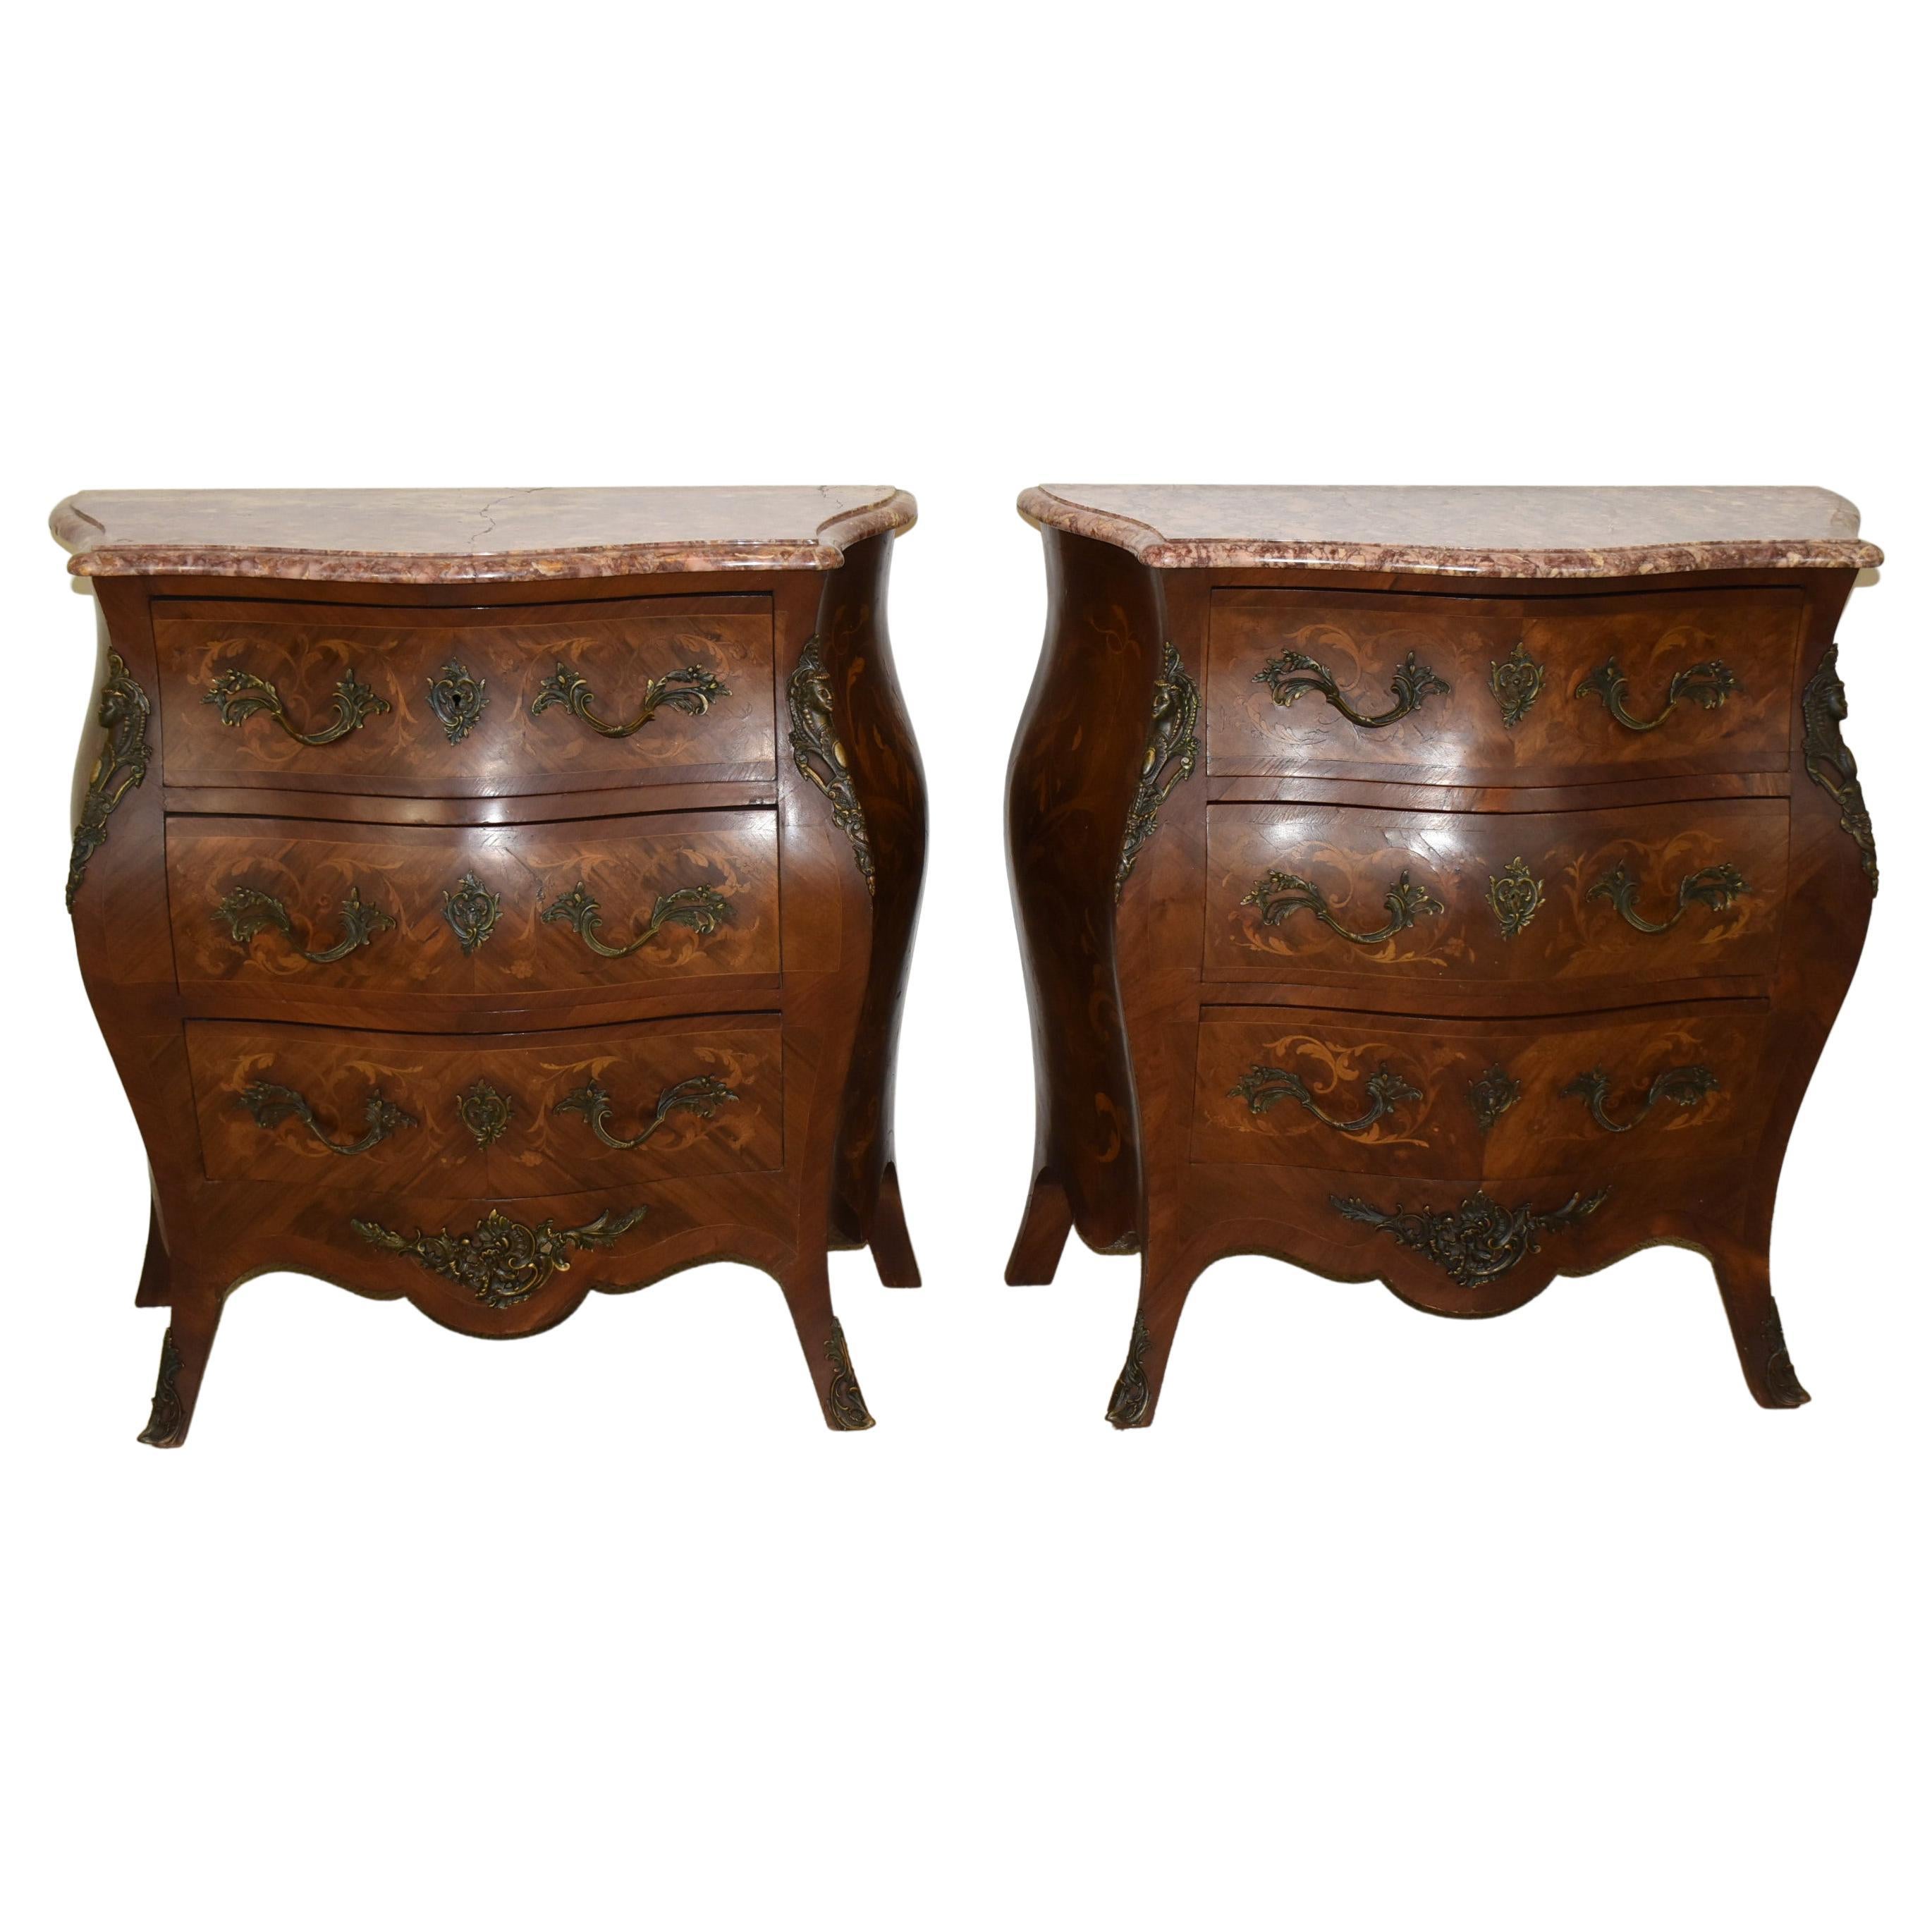 Pair of French Inlaid Commodes Marble Tops